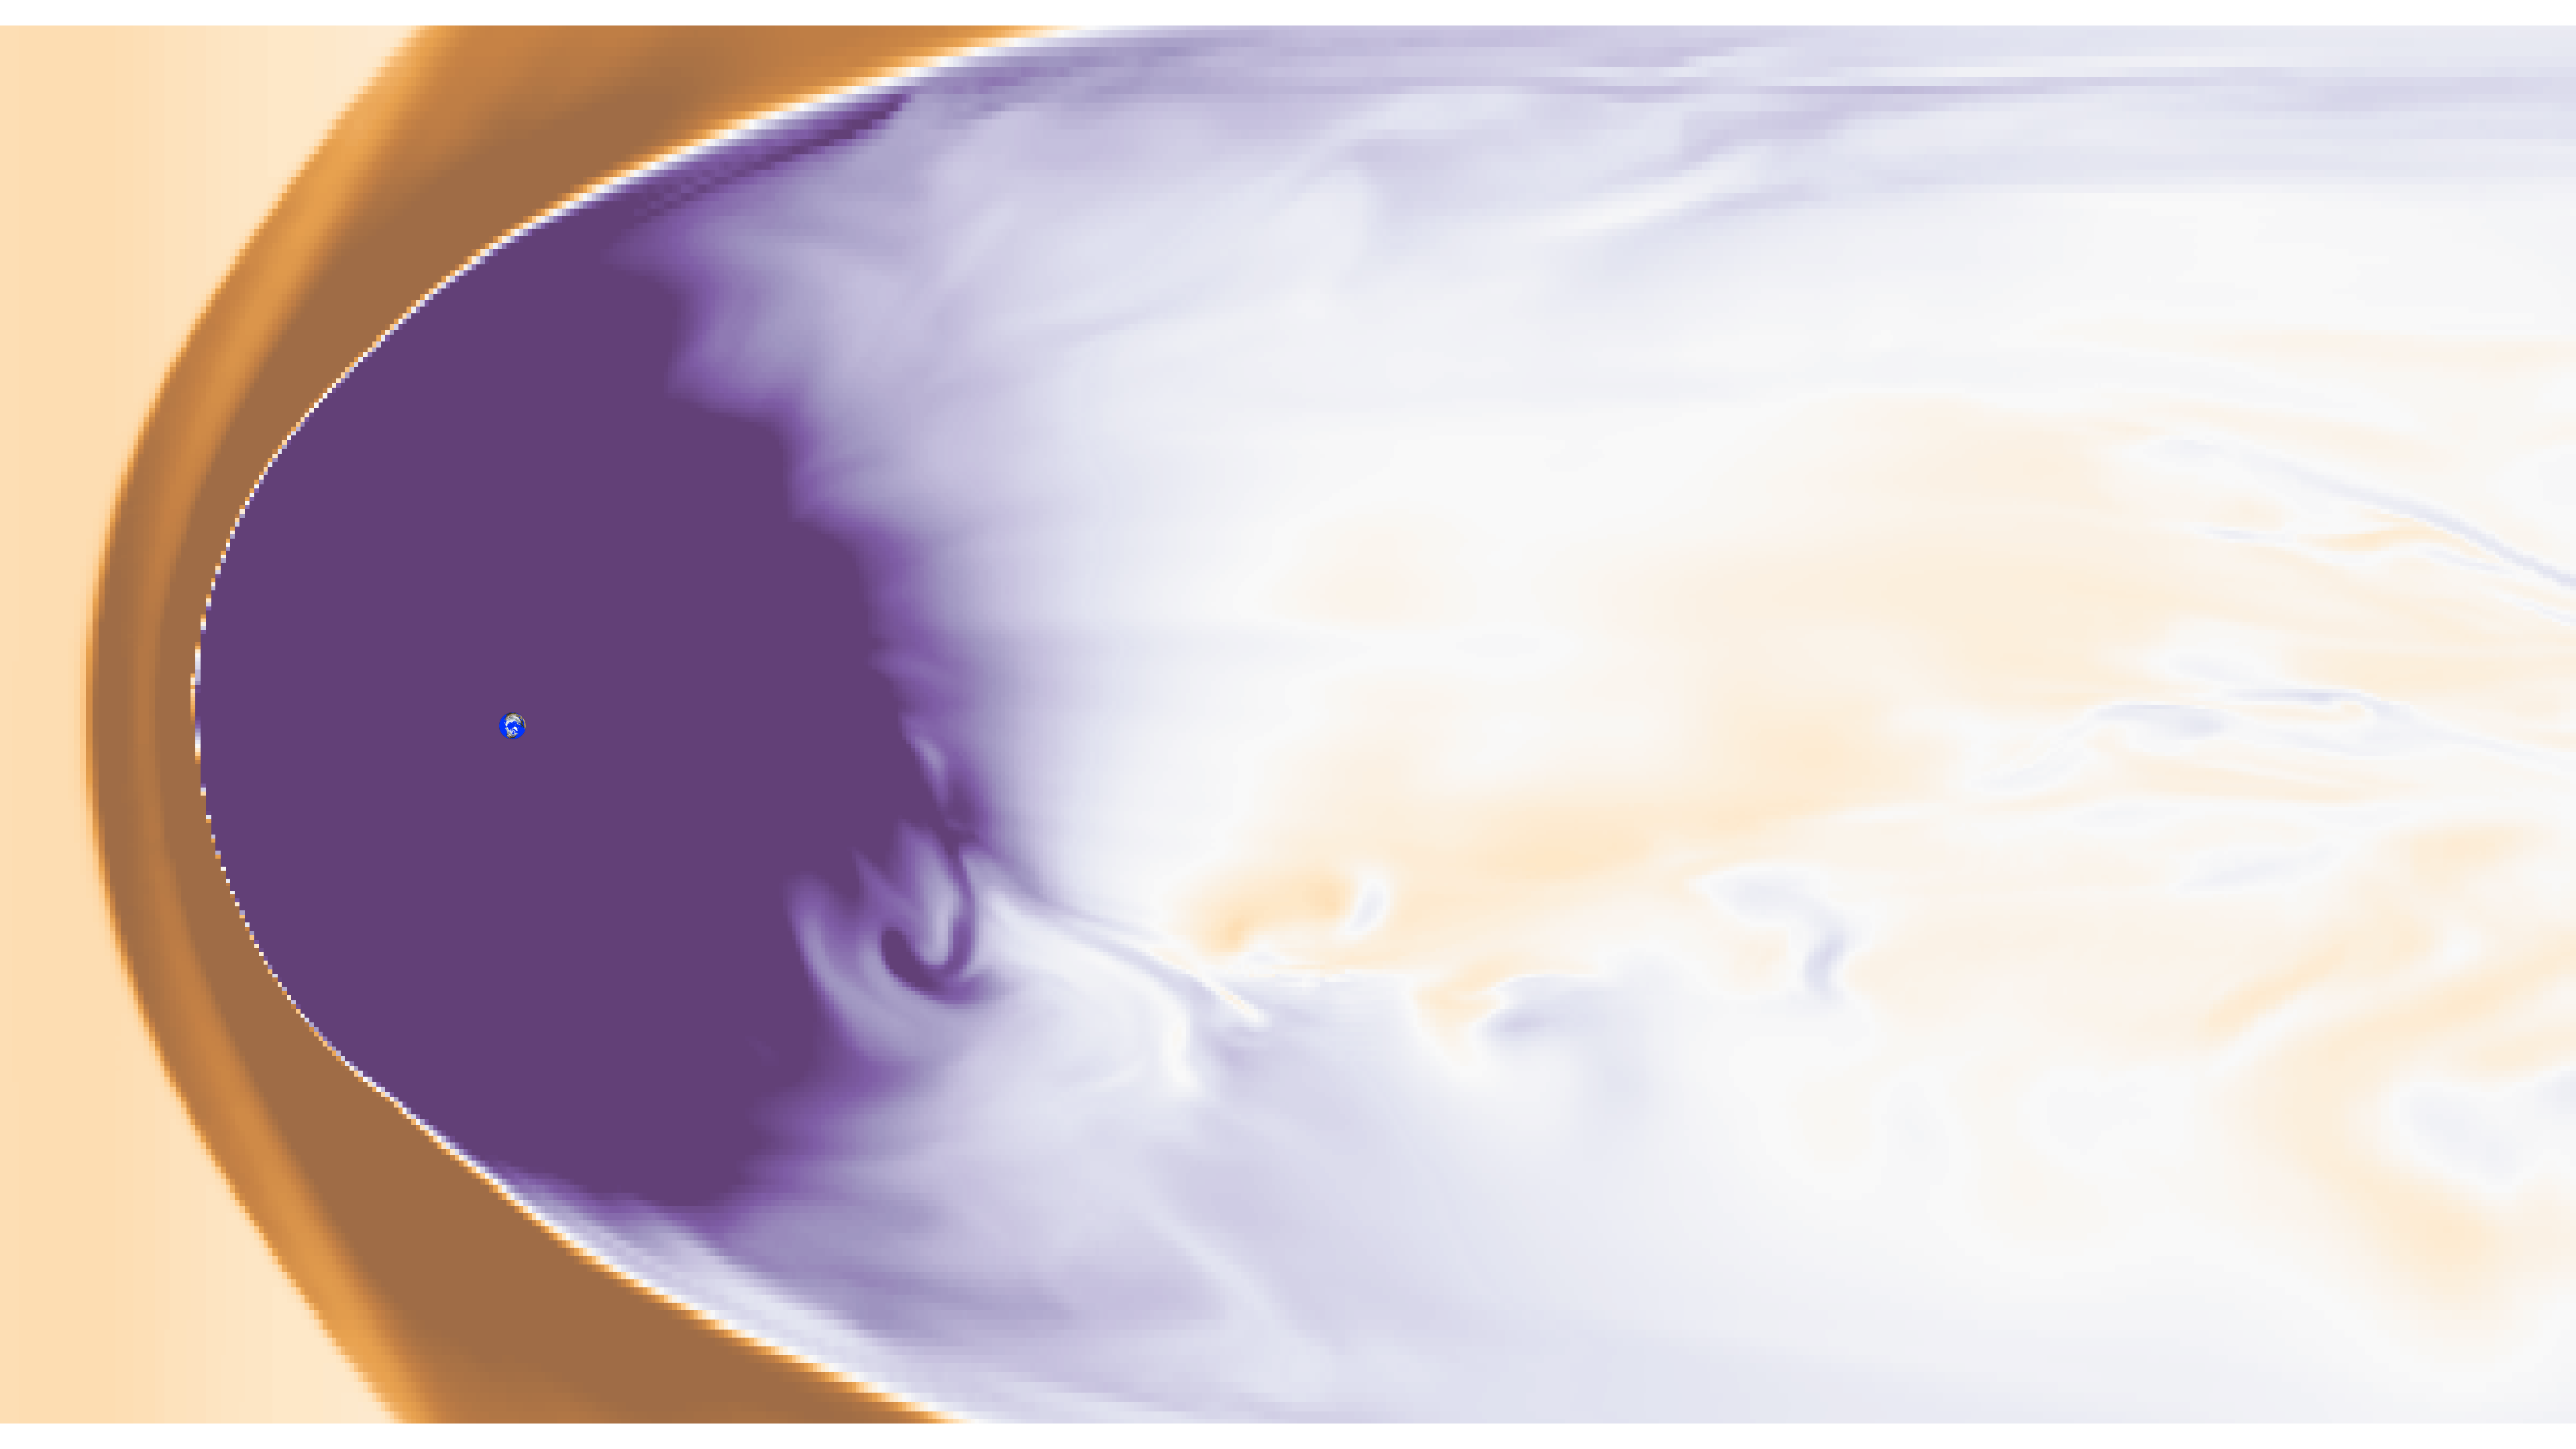 Magnetic field in x-y plane (approximately Earth equatorial plane) but pointed in the z-direction.  Purple has the field pointed towards the camera, orange has the field pointed away from the camera.  The solar wind approaches Earth (blue dot) from the left.  The magnetotail extends to the right.